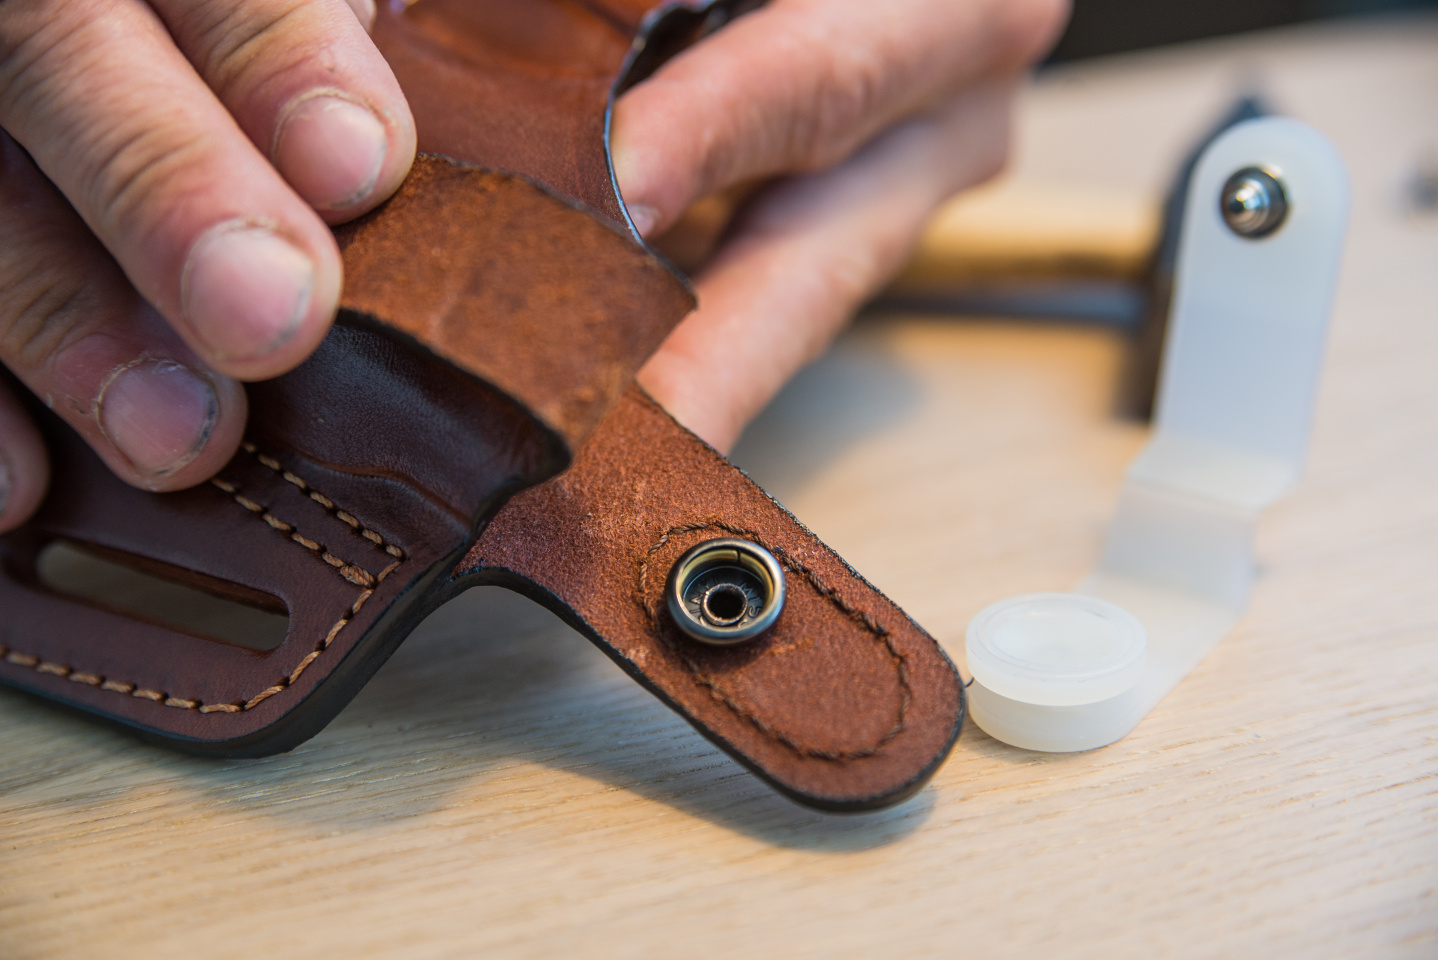 How to Remove and Replace the Snaps on Leather 